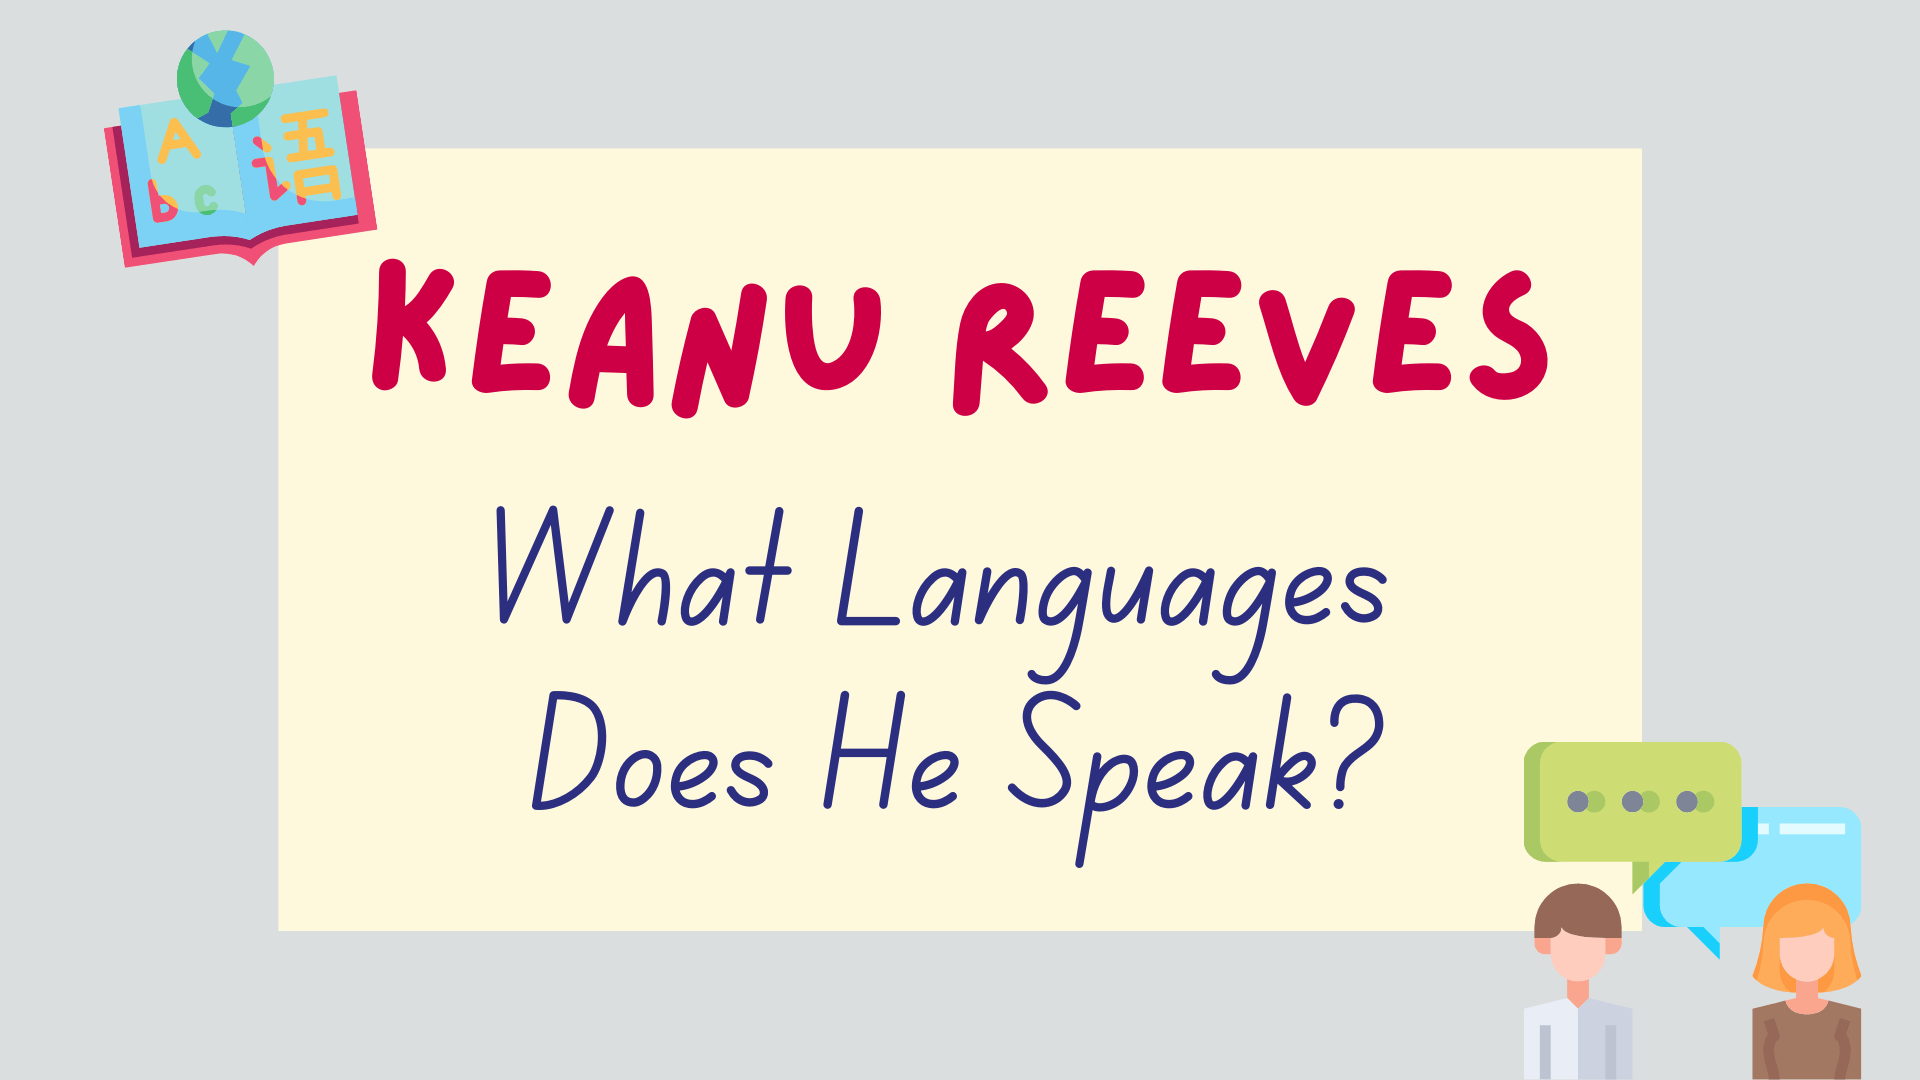 What languages does Keanu Reeves speak - featured image